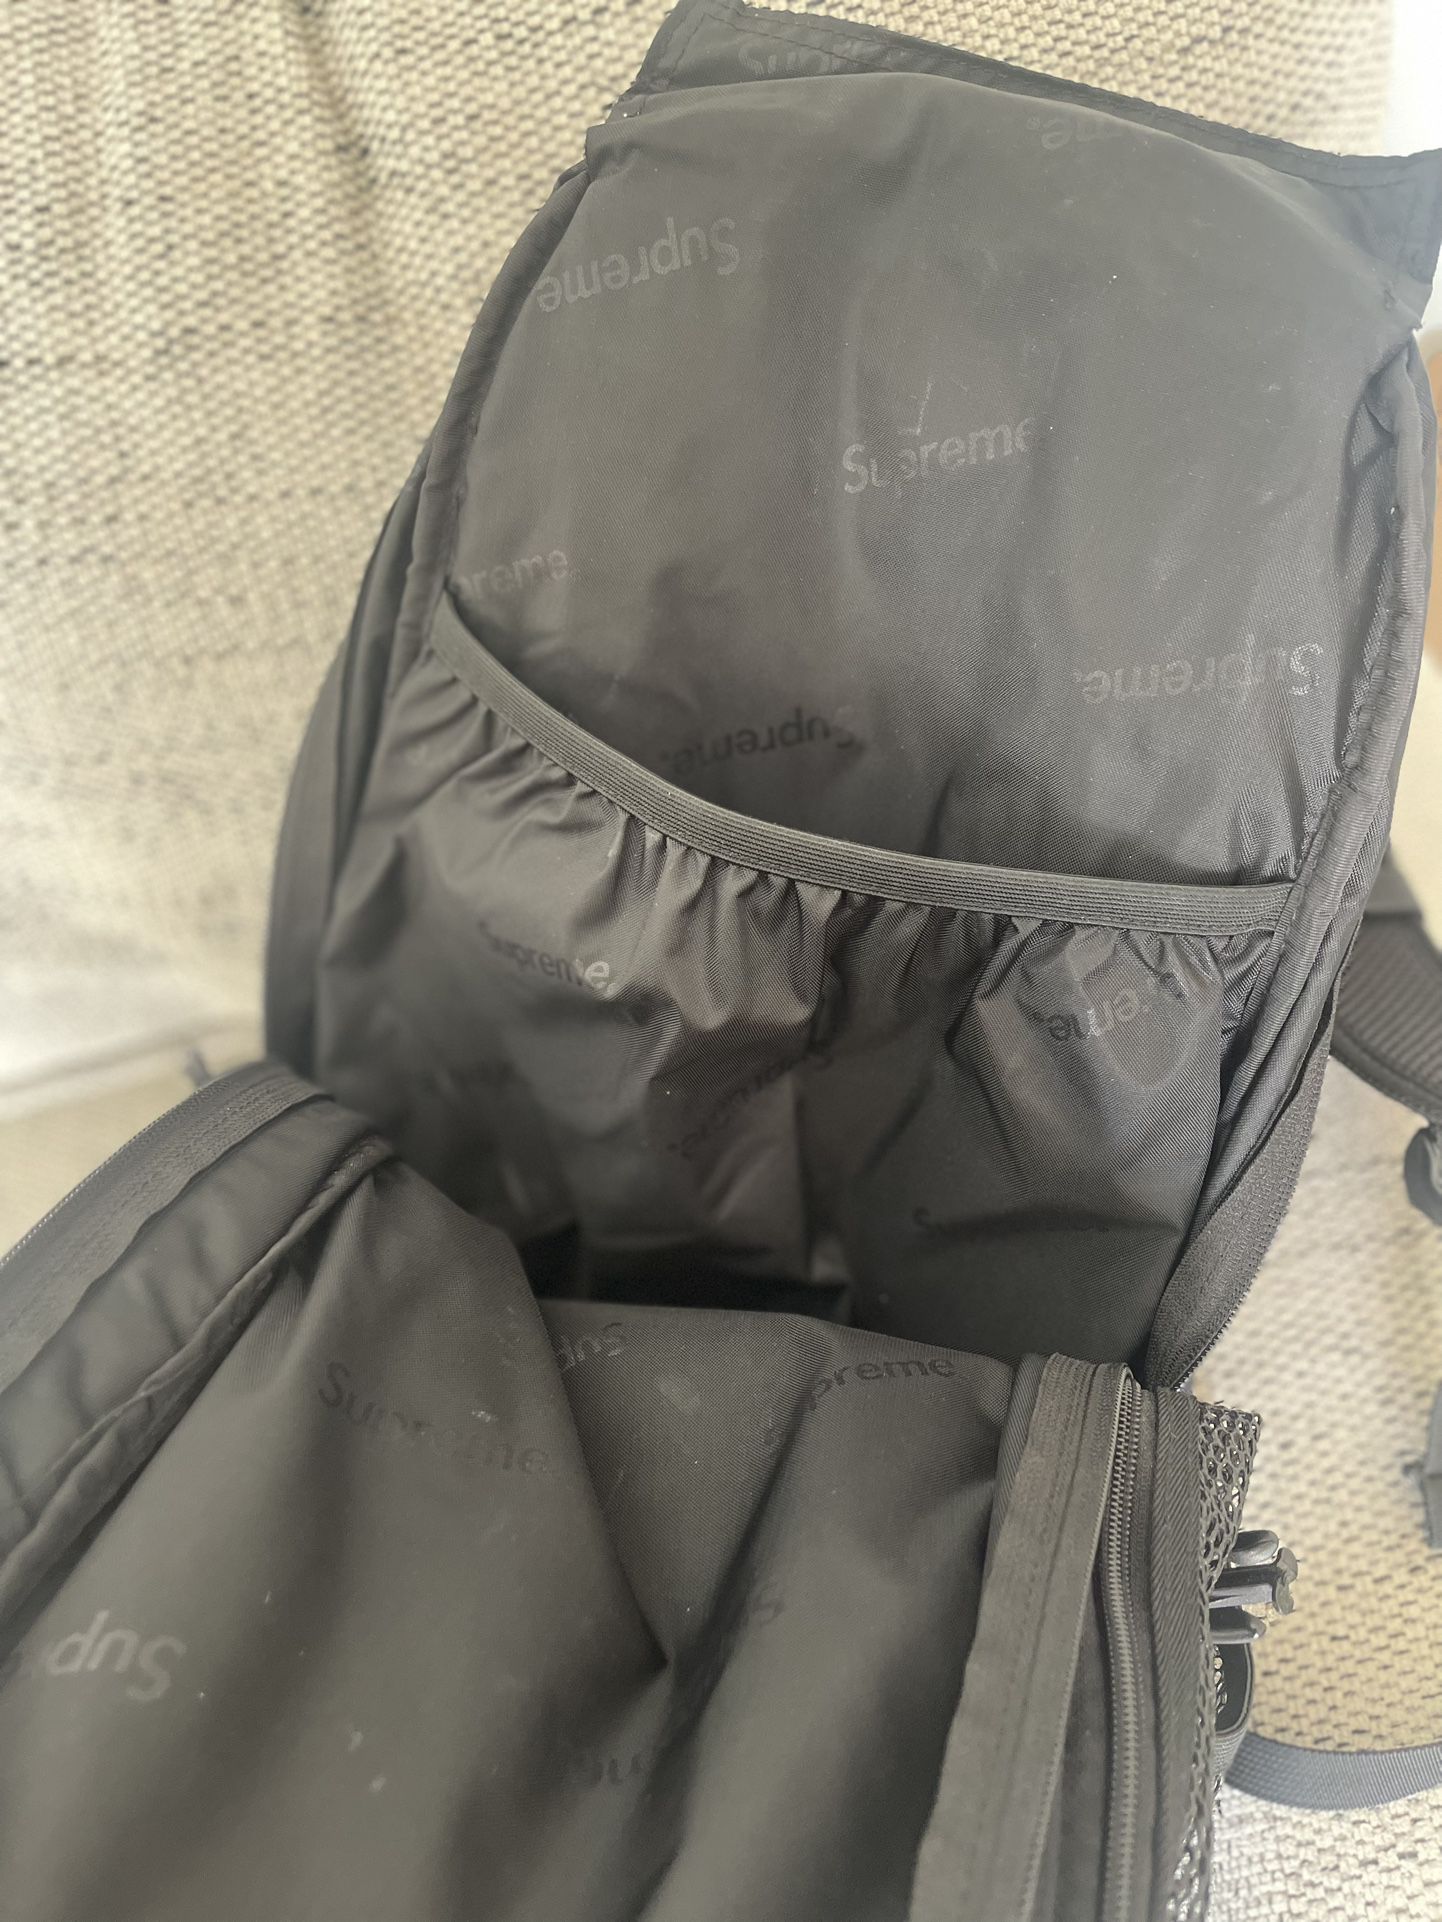 Supreme Backpack SS17 (Black) for Sale in Chino Hills, CA - OfferUp